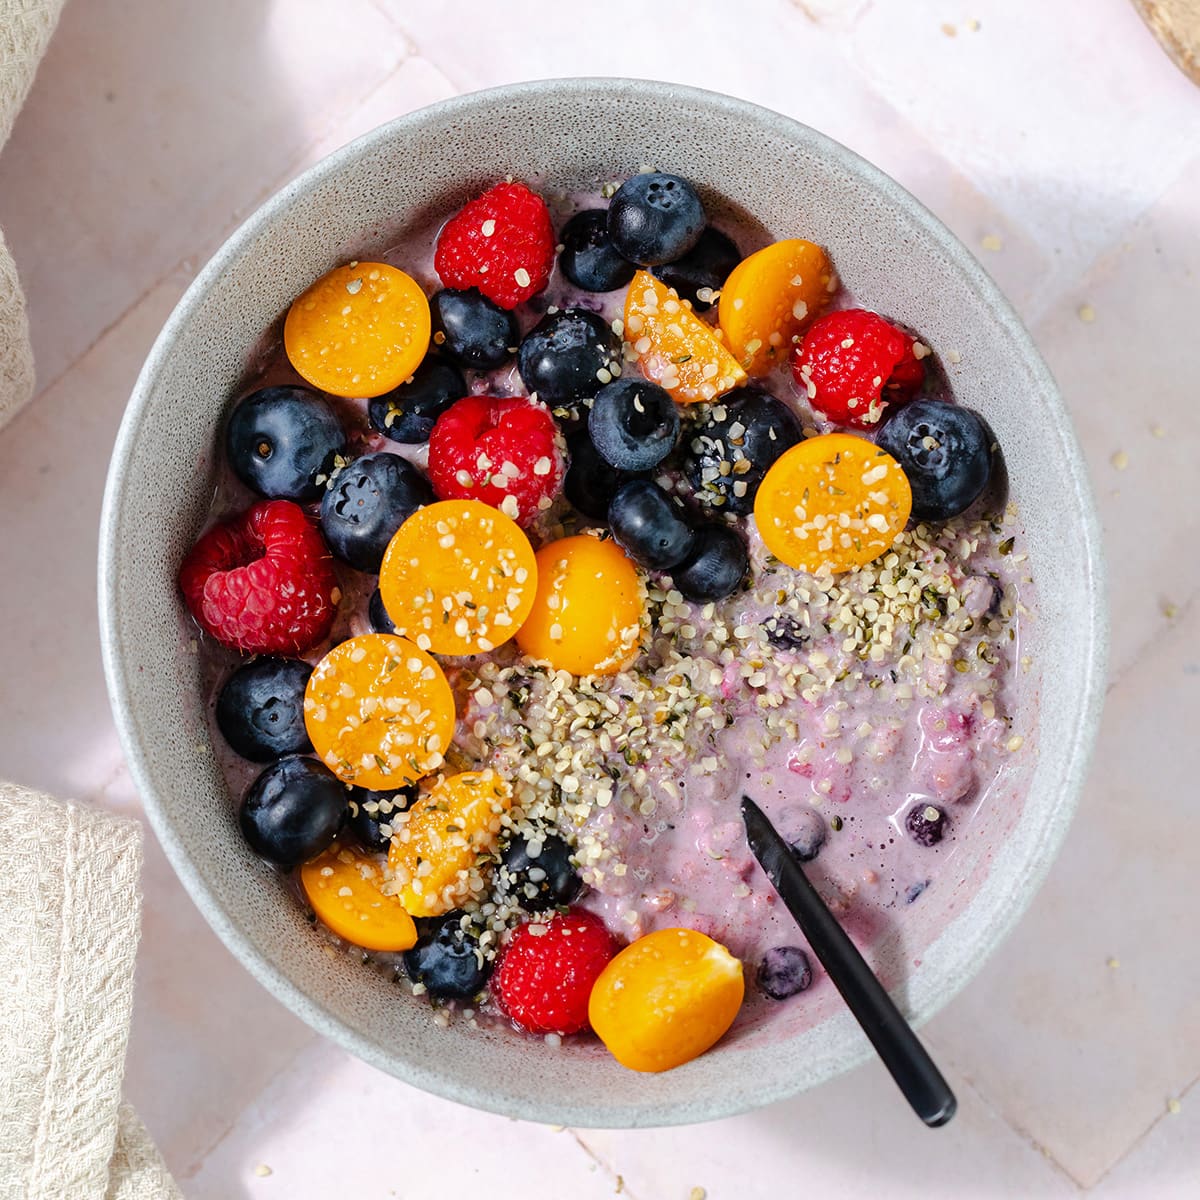 Overhead shot of blueberry overnight oats in a grey bowl topped with blueberries, raspberries, golden berries, and hemp seeds. Pink tile background.